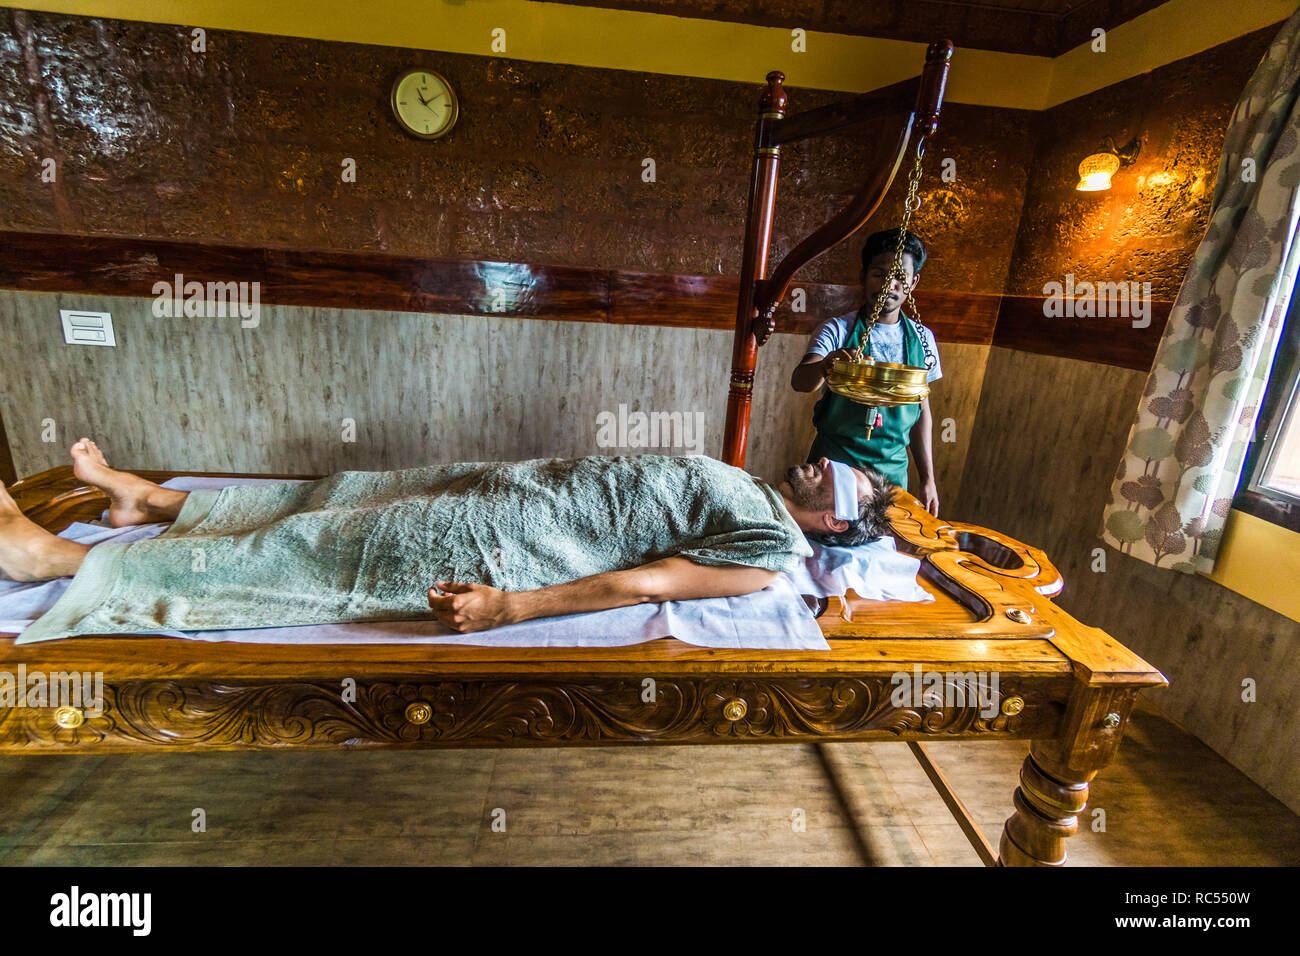 Karnataka, Inde - le 20 août 2018 : Young man relaxing in spa indien. Rédaction d'illustration. Banque D'Images